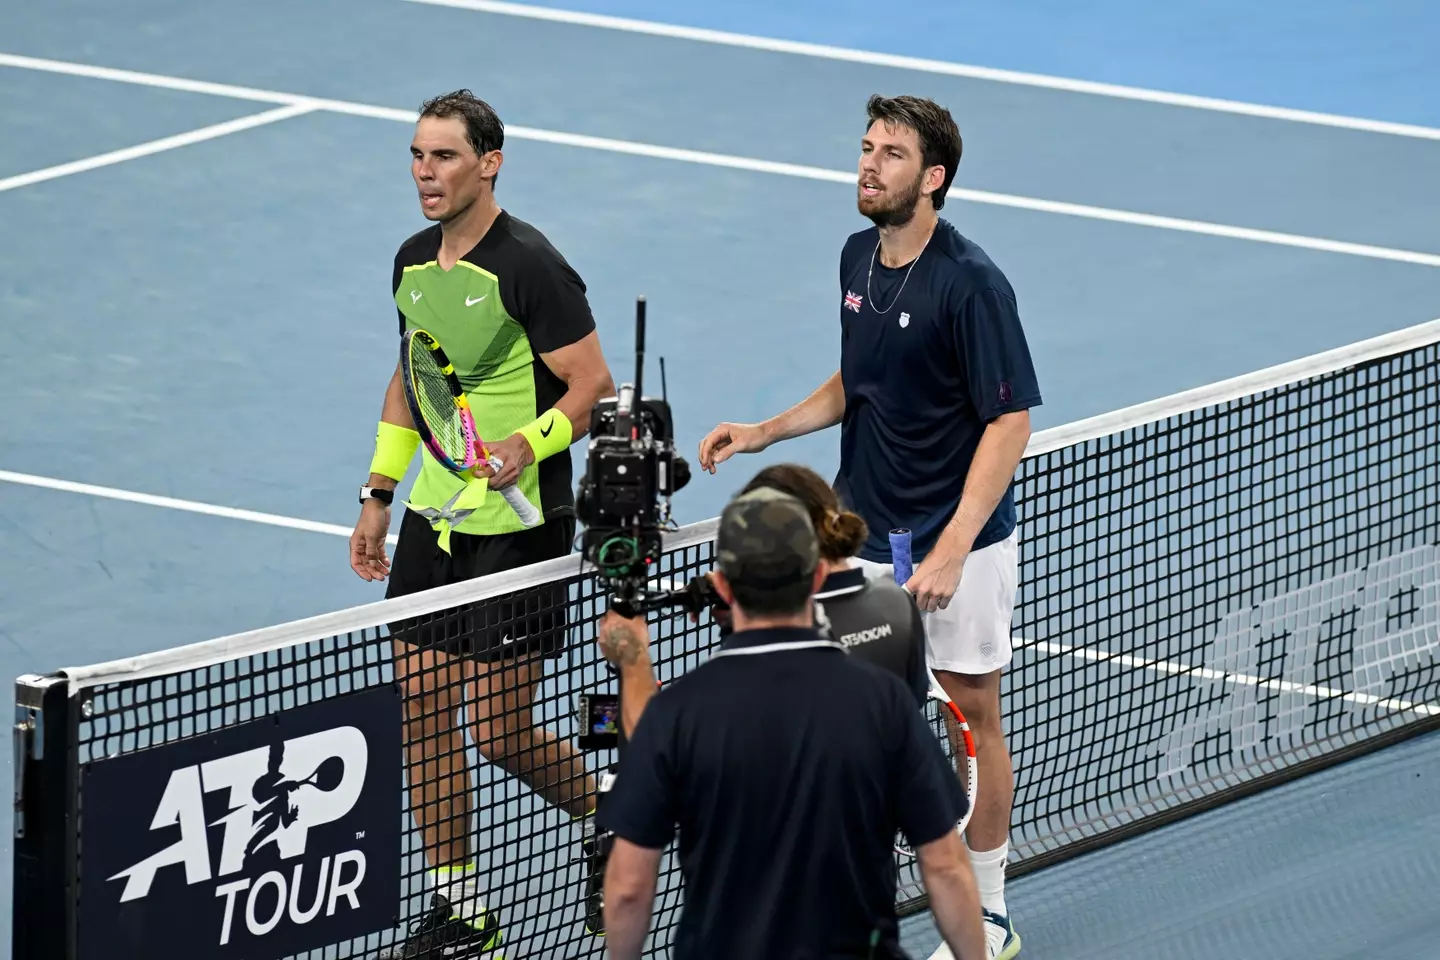 Norrie's excellent form saw him beat Nadal at the United Cup. Image: Alamy